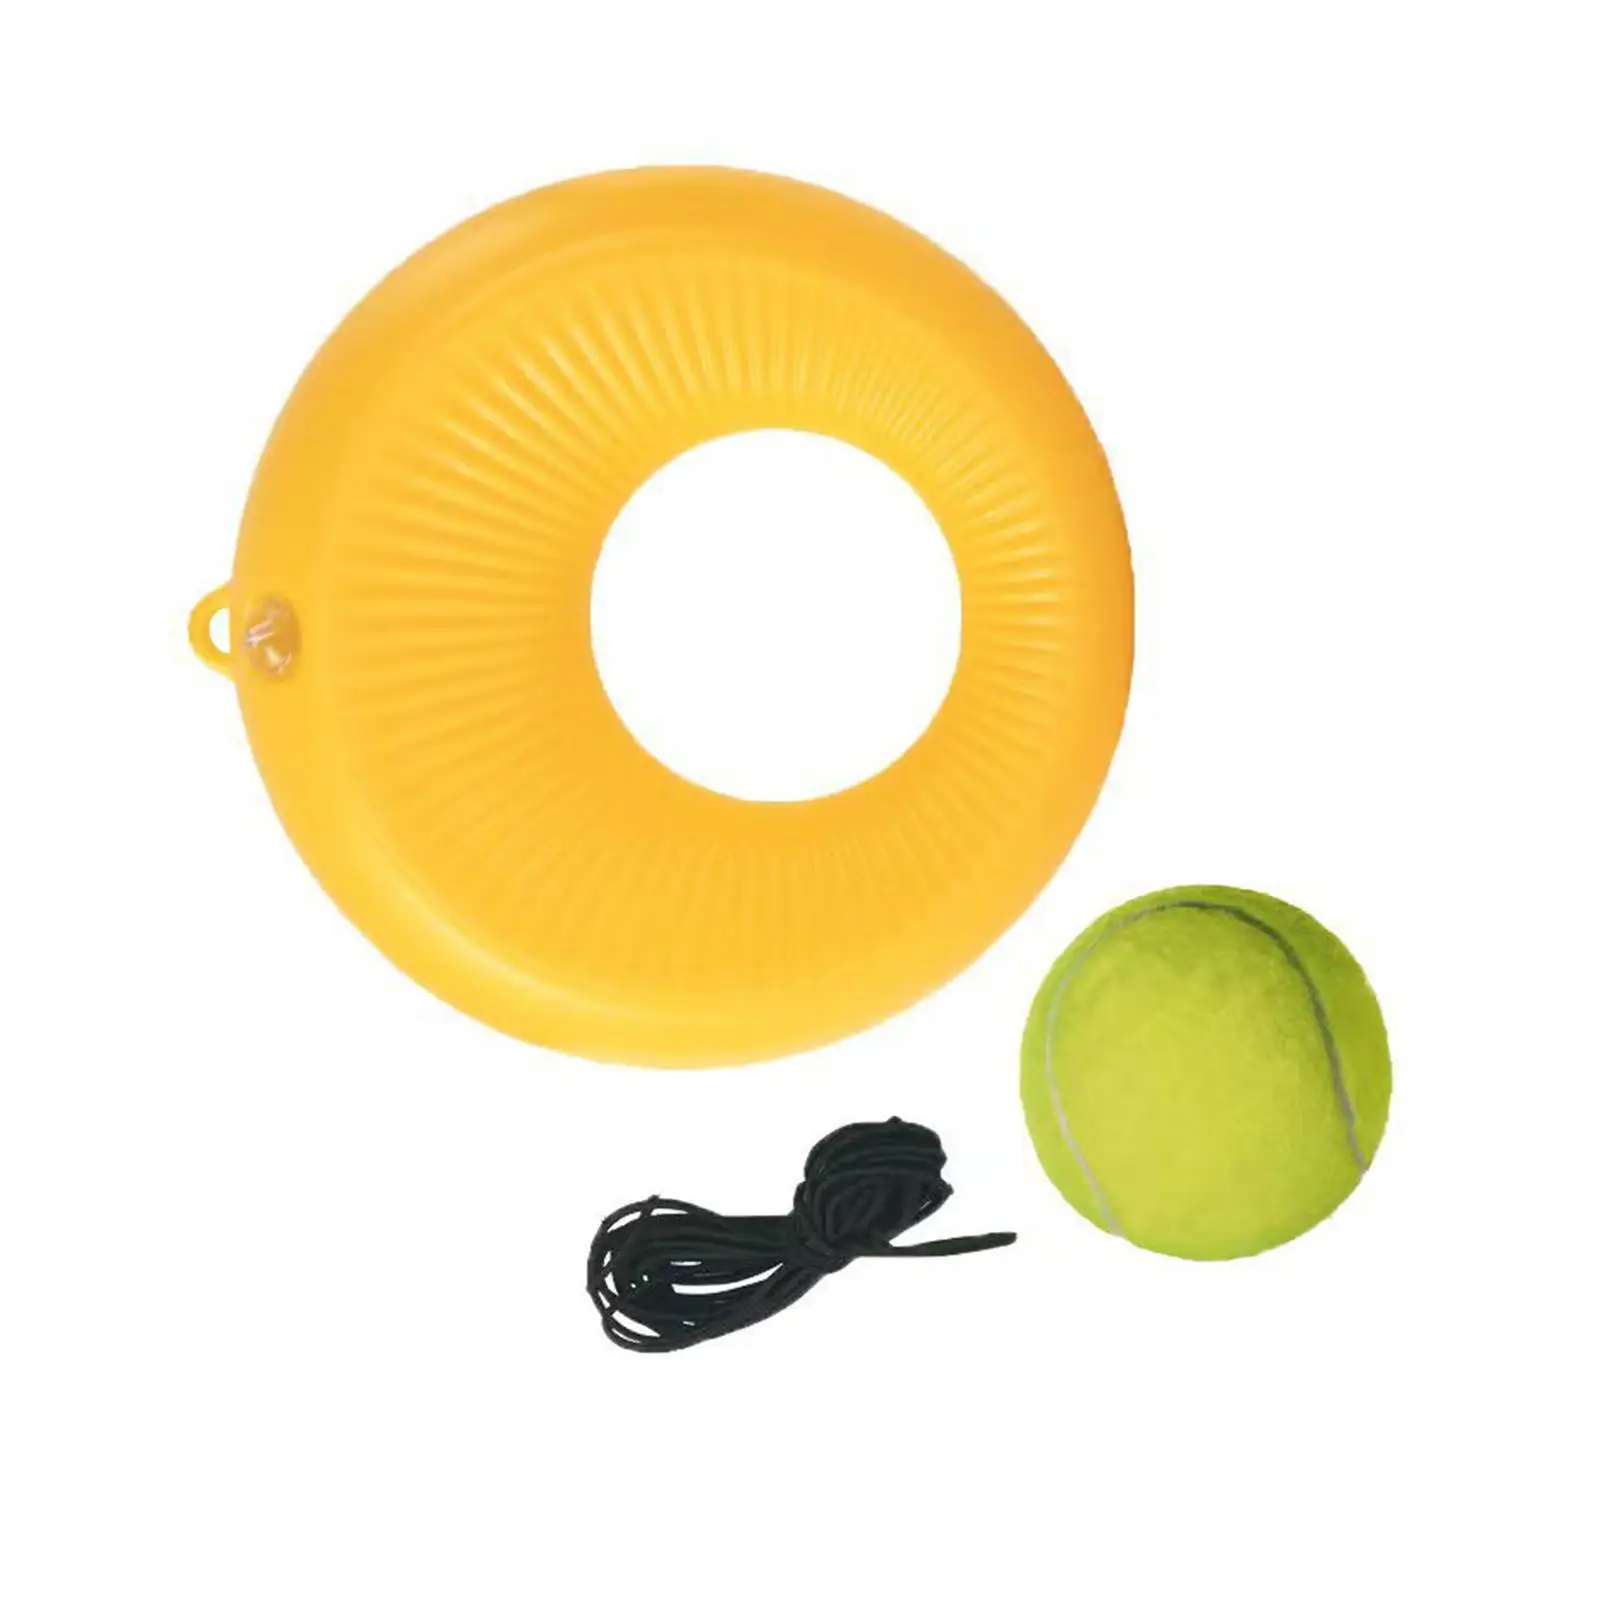 Tennis Trainer Indoor Outdoor Hand Eye Coordination Tennis Rebound Ball with String Self Training Tool for Kids Adults Hitting